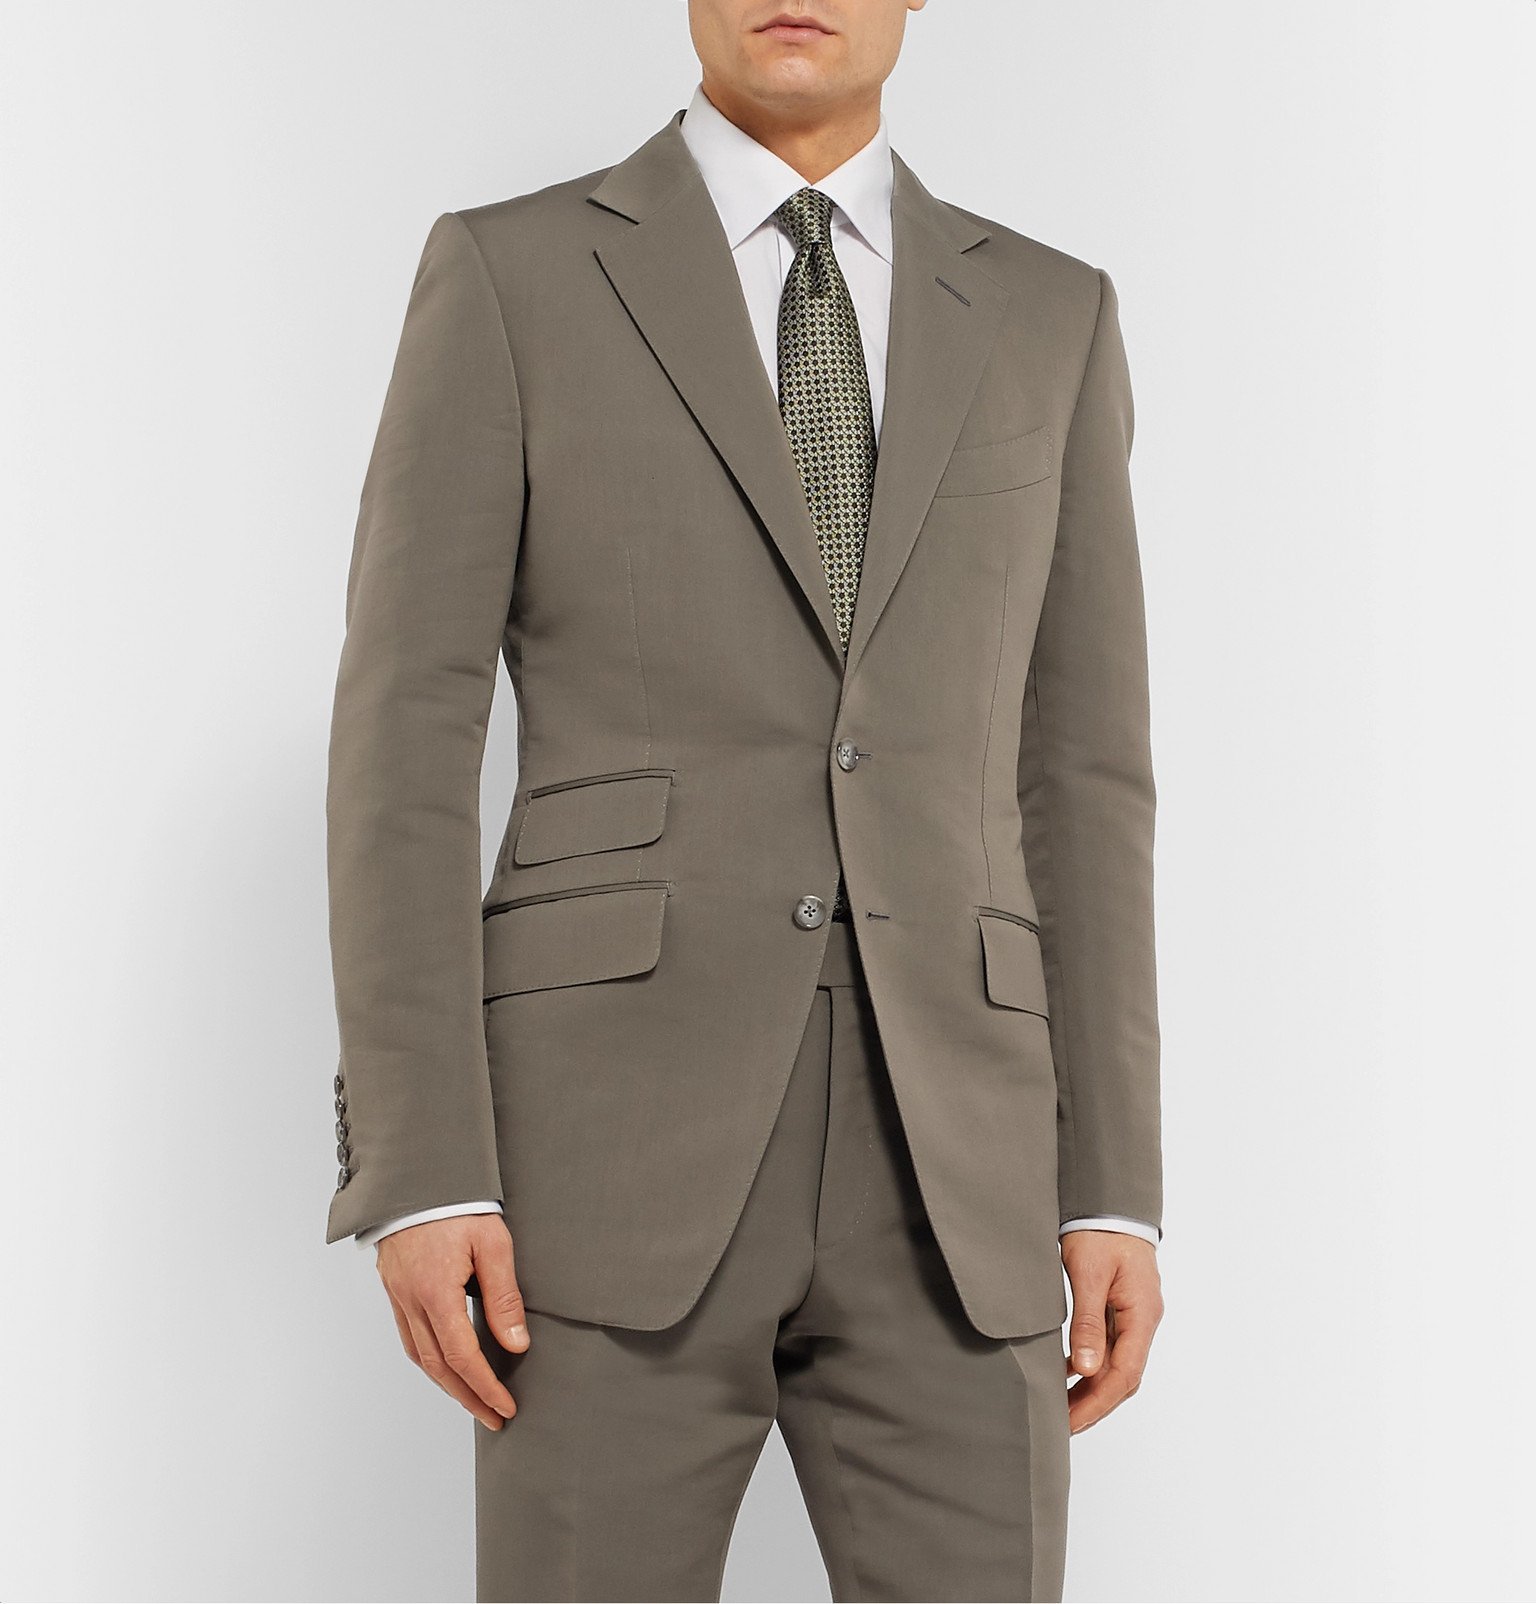 TOM FORD - Army-Green O'Connor Slim-Fit Cotton and Silk-Blend Suit Jacket - Green  TOM FORD